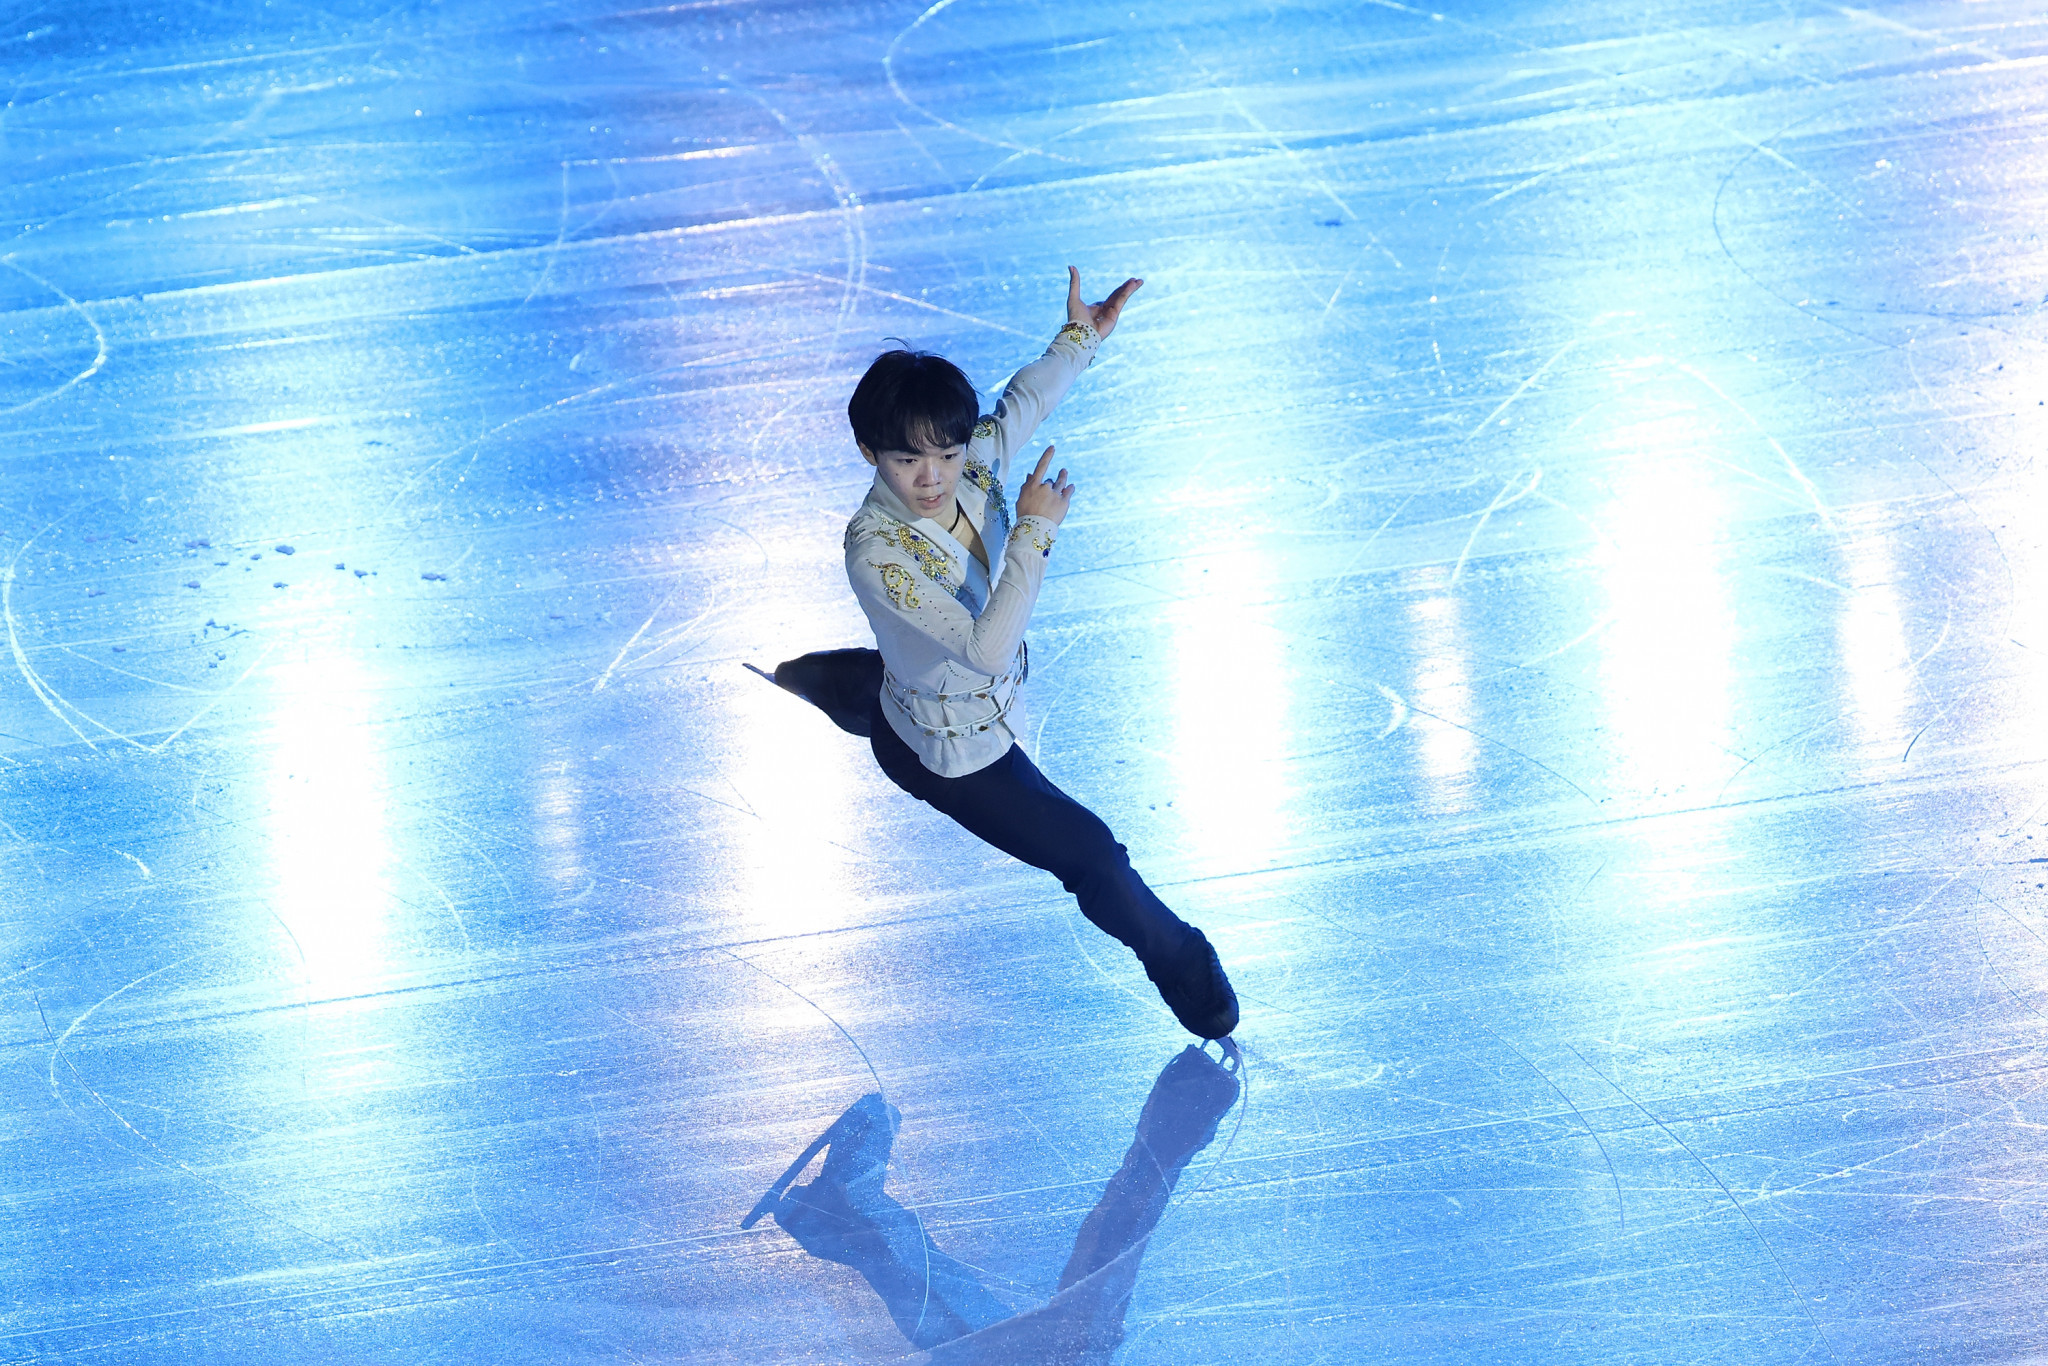 Kagiyama jumps from seventh to first in comeback ISU Grand Prix of Italy triumph